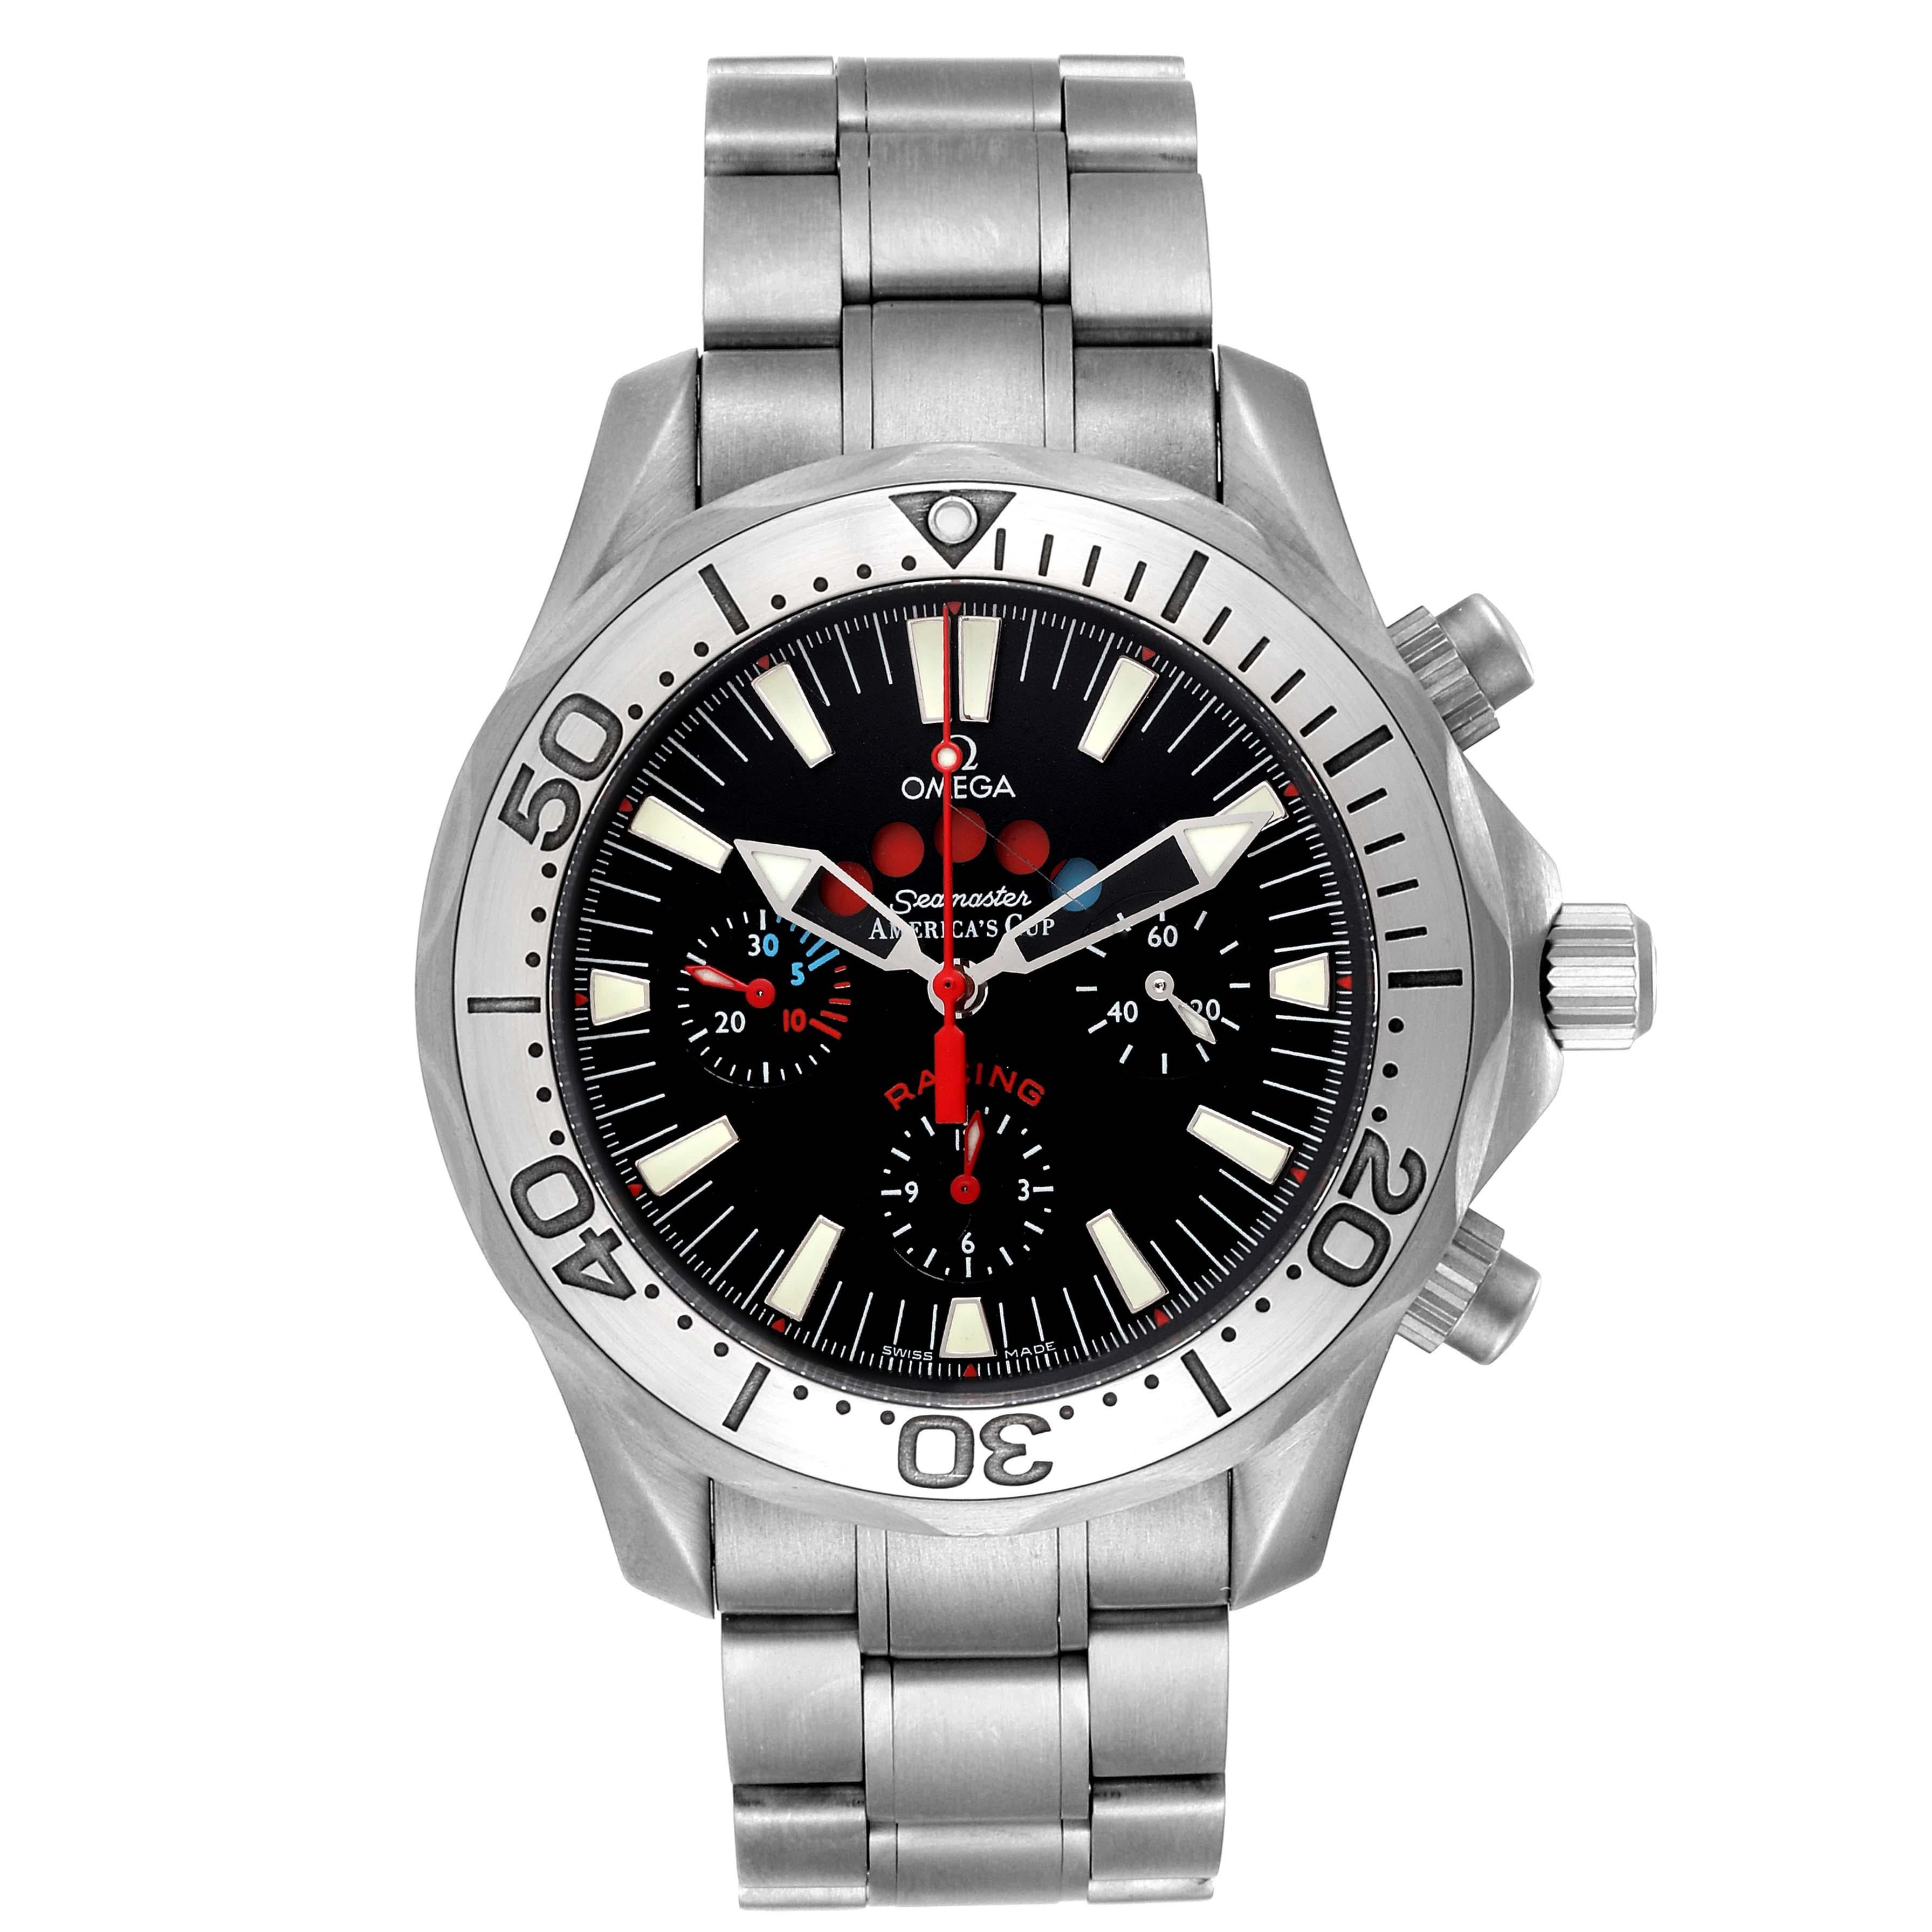 Omega Seamaster Regatta Racing Titanium Mens Watch 2269.52.00. Officially certified chronometer automatic self-winding movement. Chronograph function. Titanium case 44 mm in diameter. Omega logo on a crown. Unidirectional rotating ratcheted bezel,